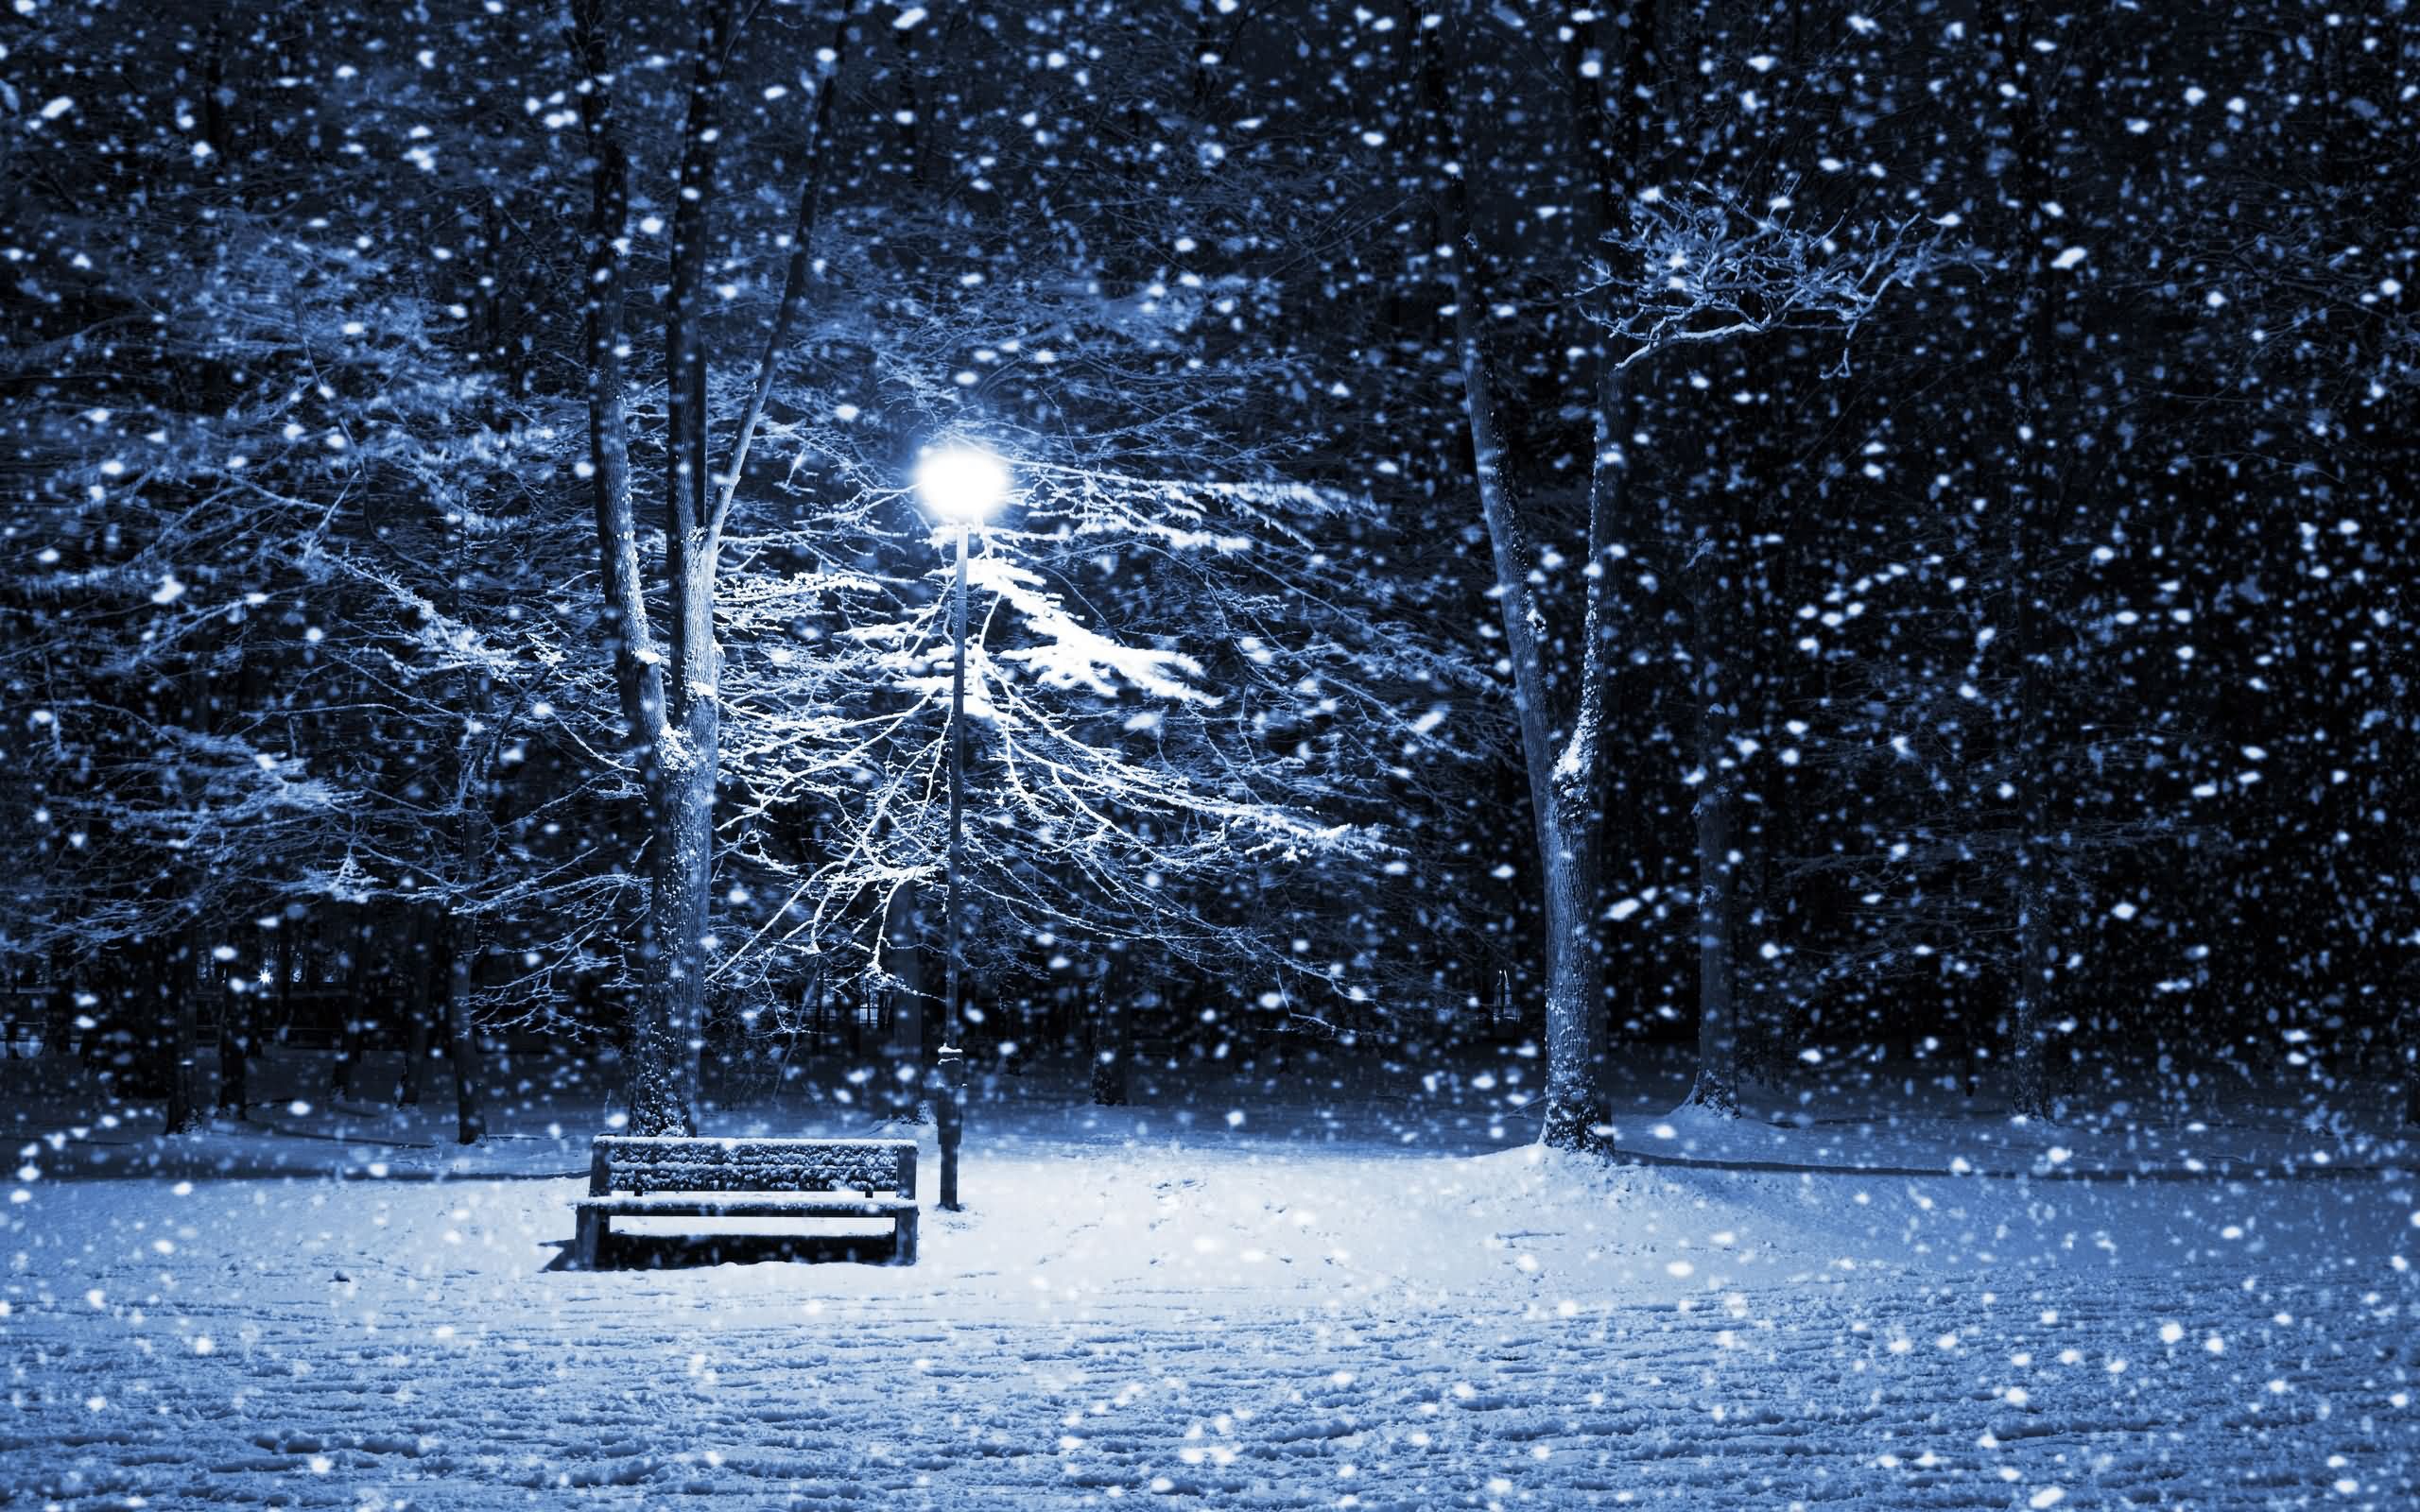 Winter Snowfall Night Sunset Image - Images, Photos, Pictures